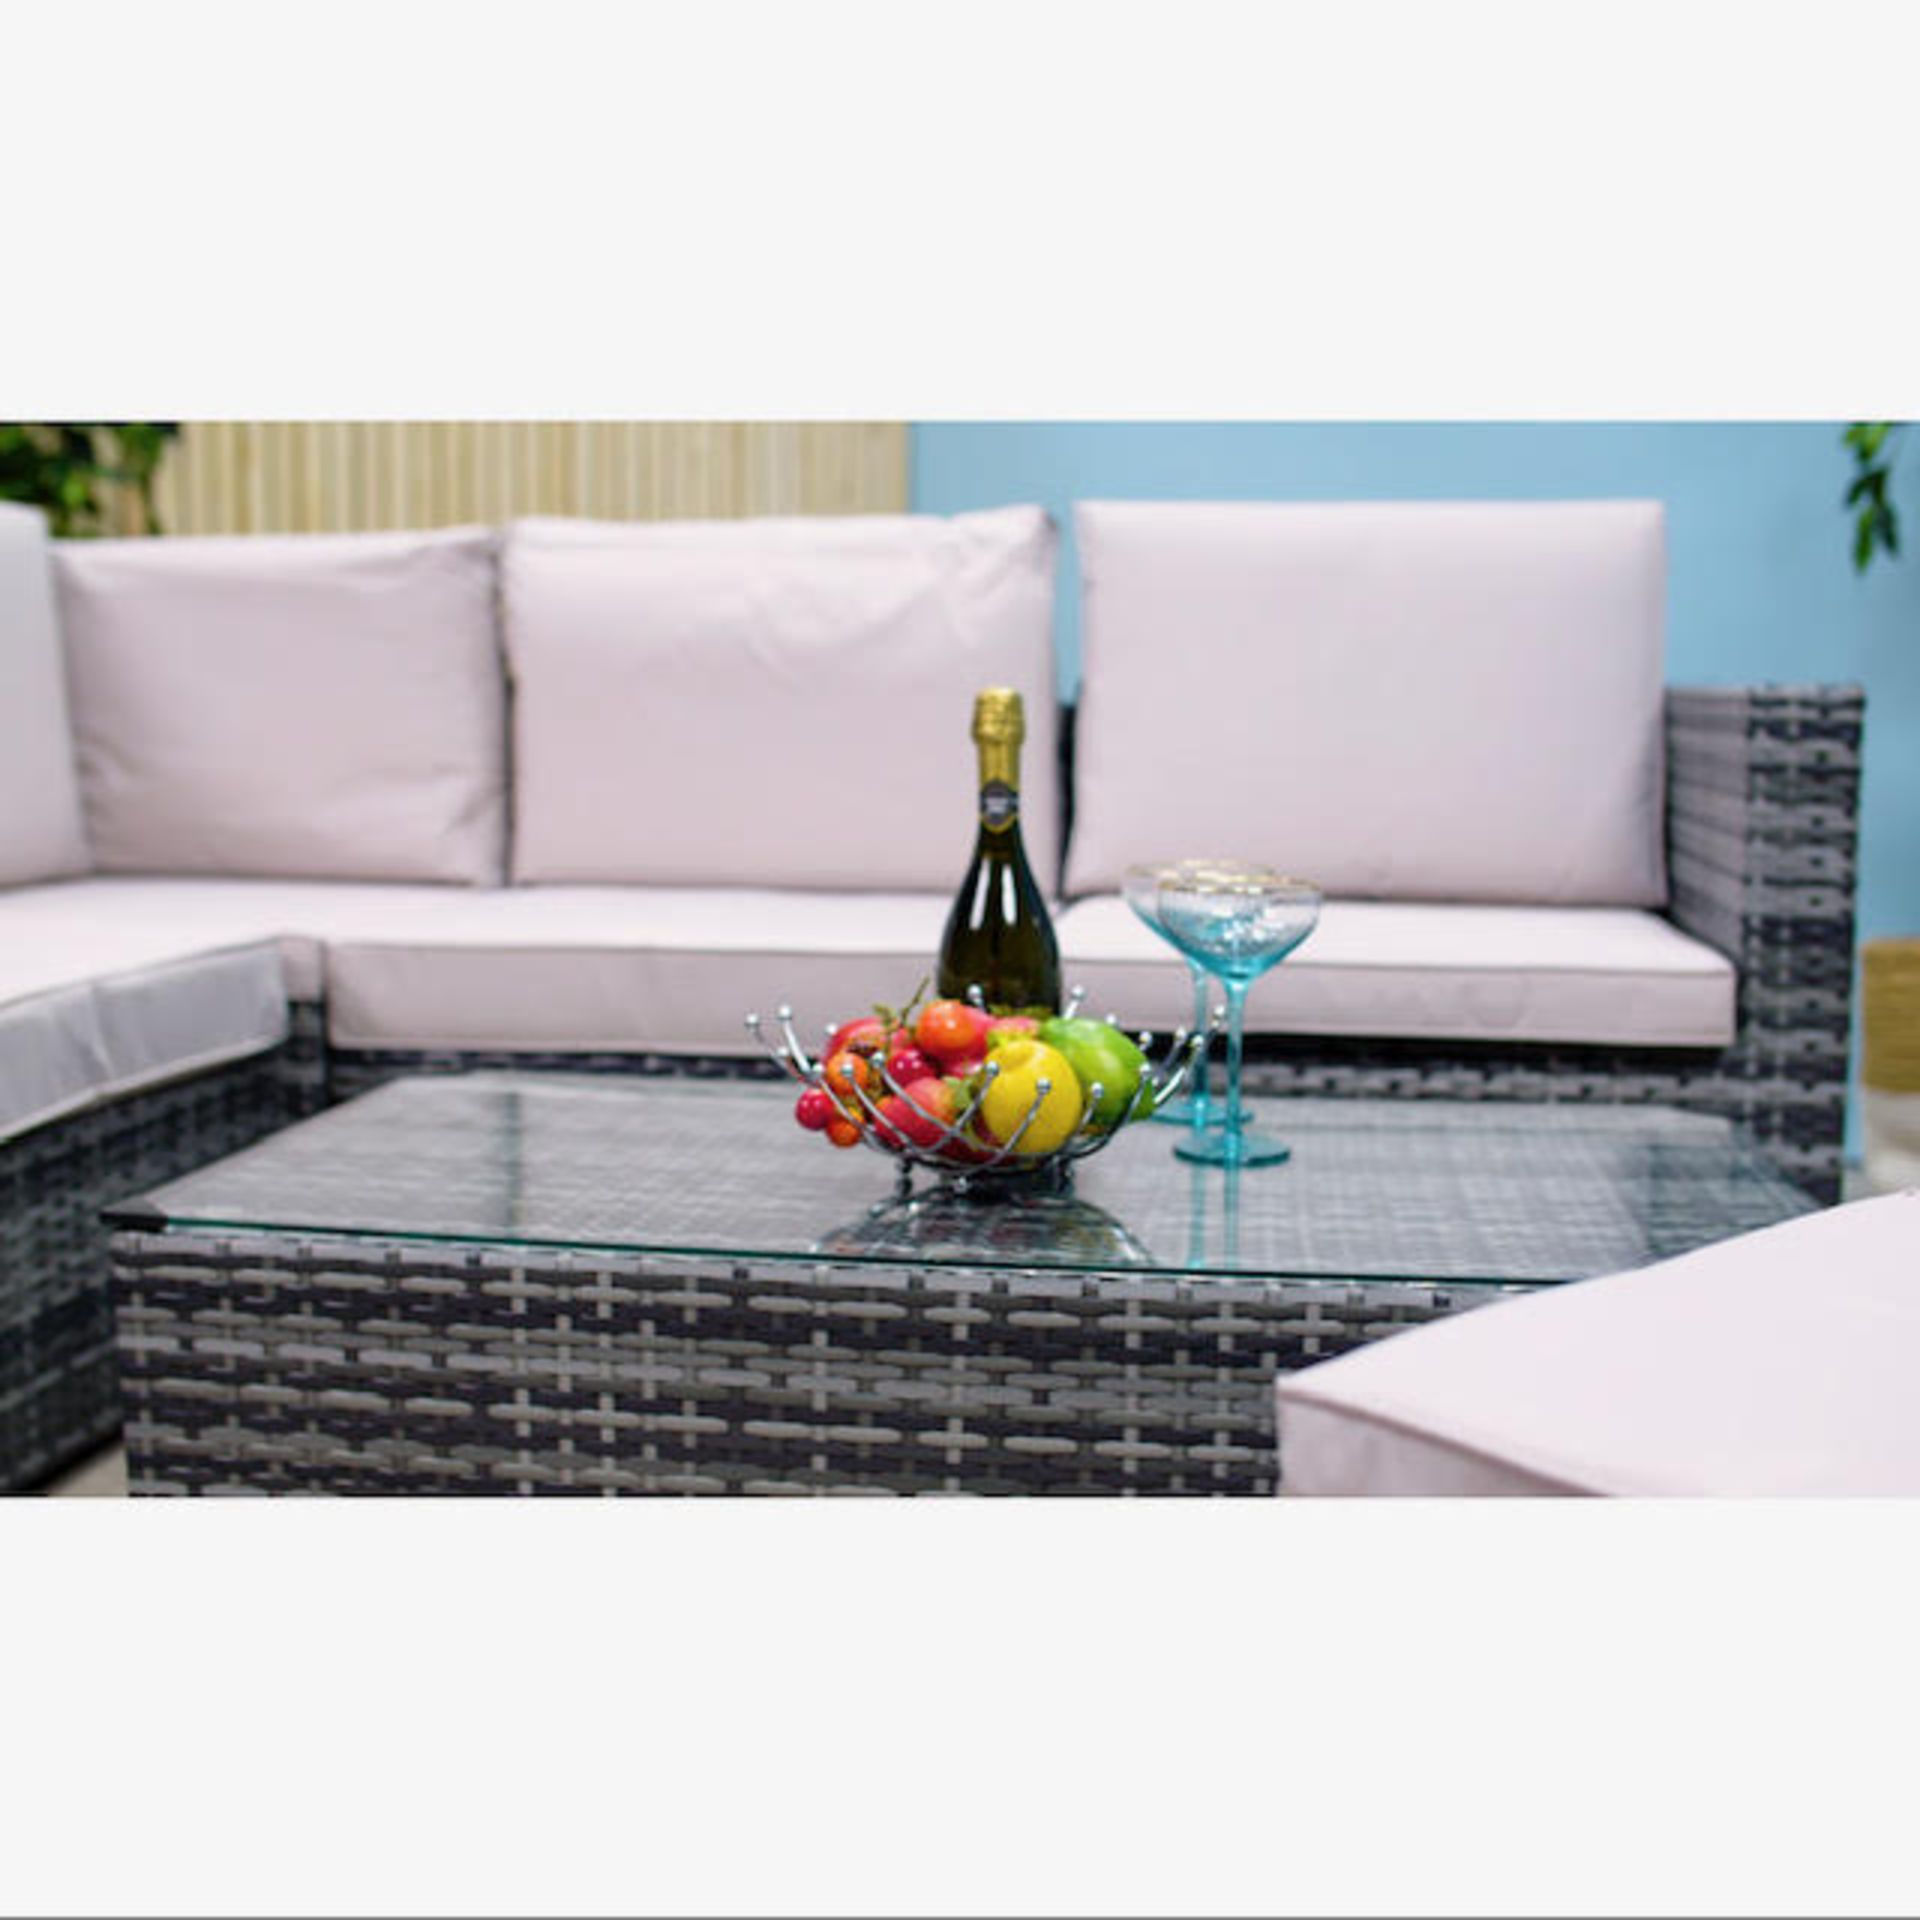 BRAND NEW LINEA 7 PIECE LUXURY RATTAN SETS RRP £1499 EACH. PERFECT FOR THOSE SUMMER NIGHTS FOR - Image 3 of 6